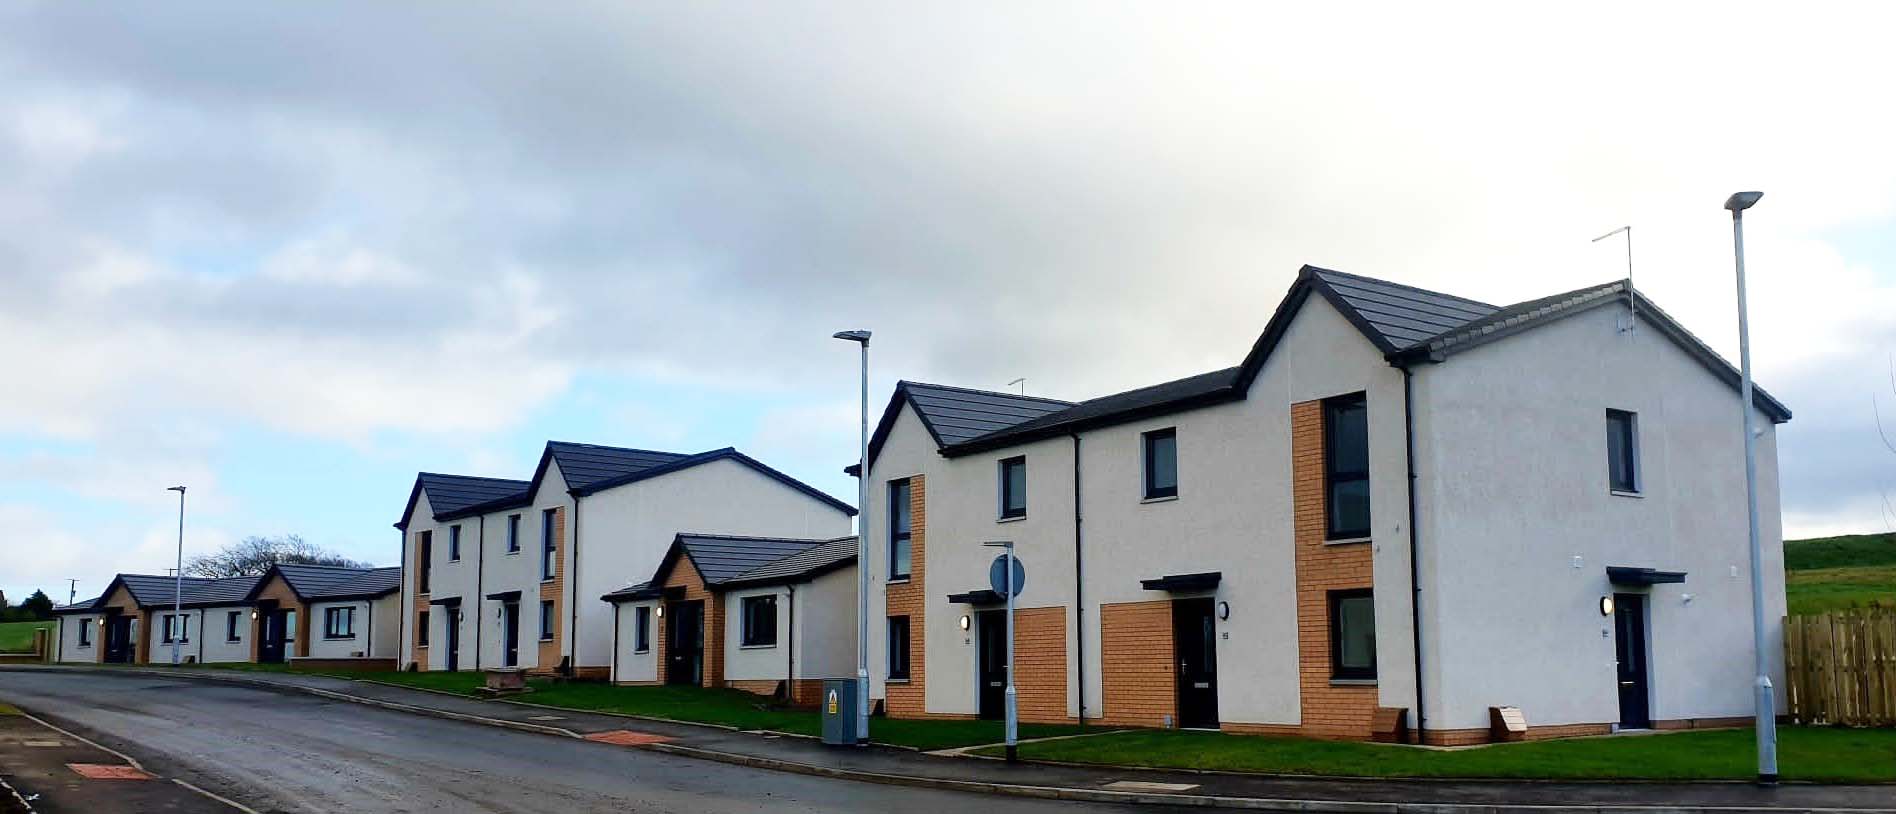 Black’s Blog: The challenges and opportunities of modular housebuilding